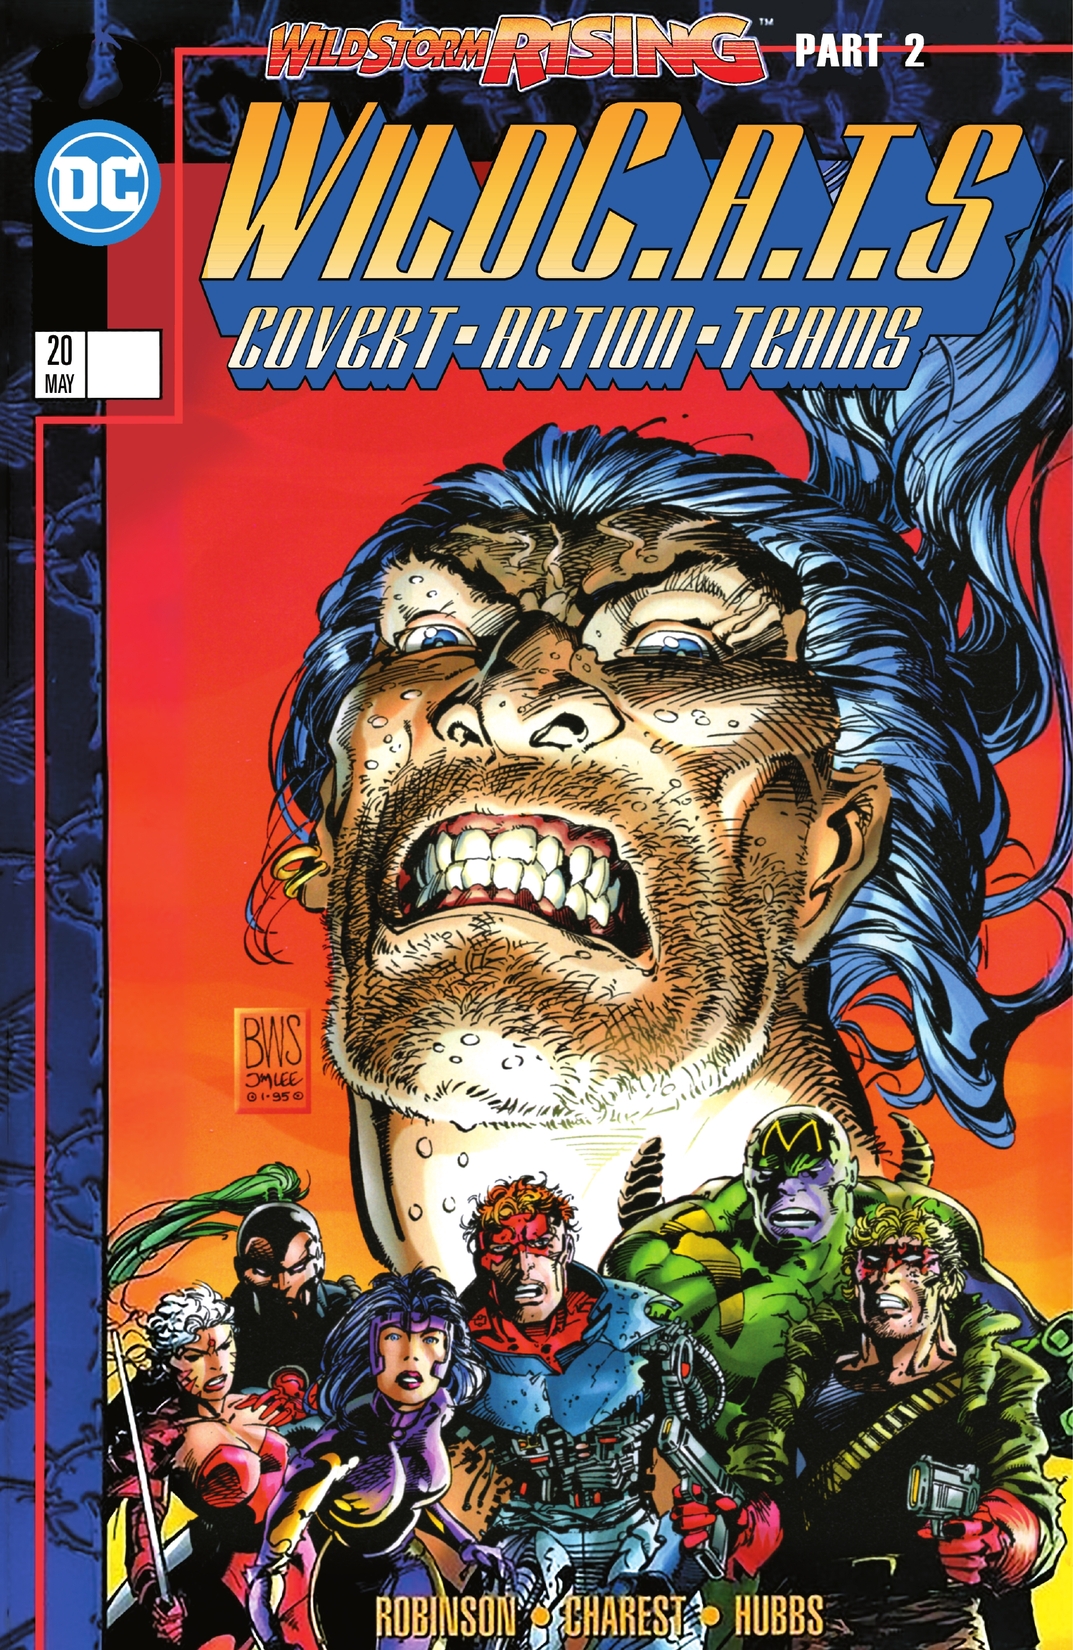 WildC.A.Ts: Covert Action Teams #20 preview images